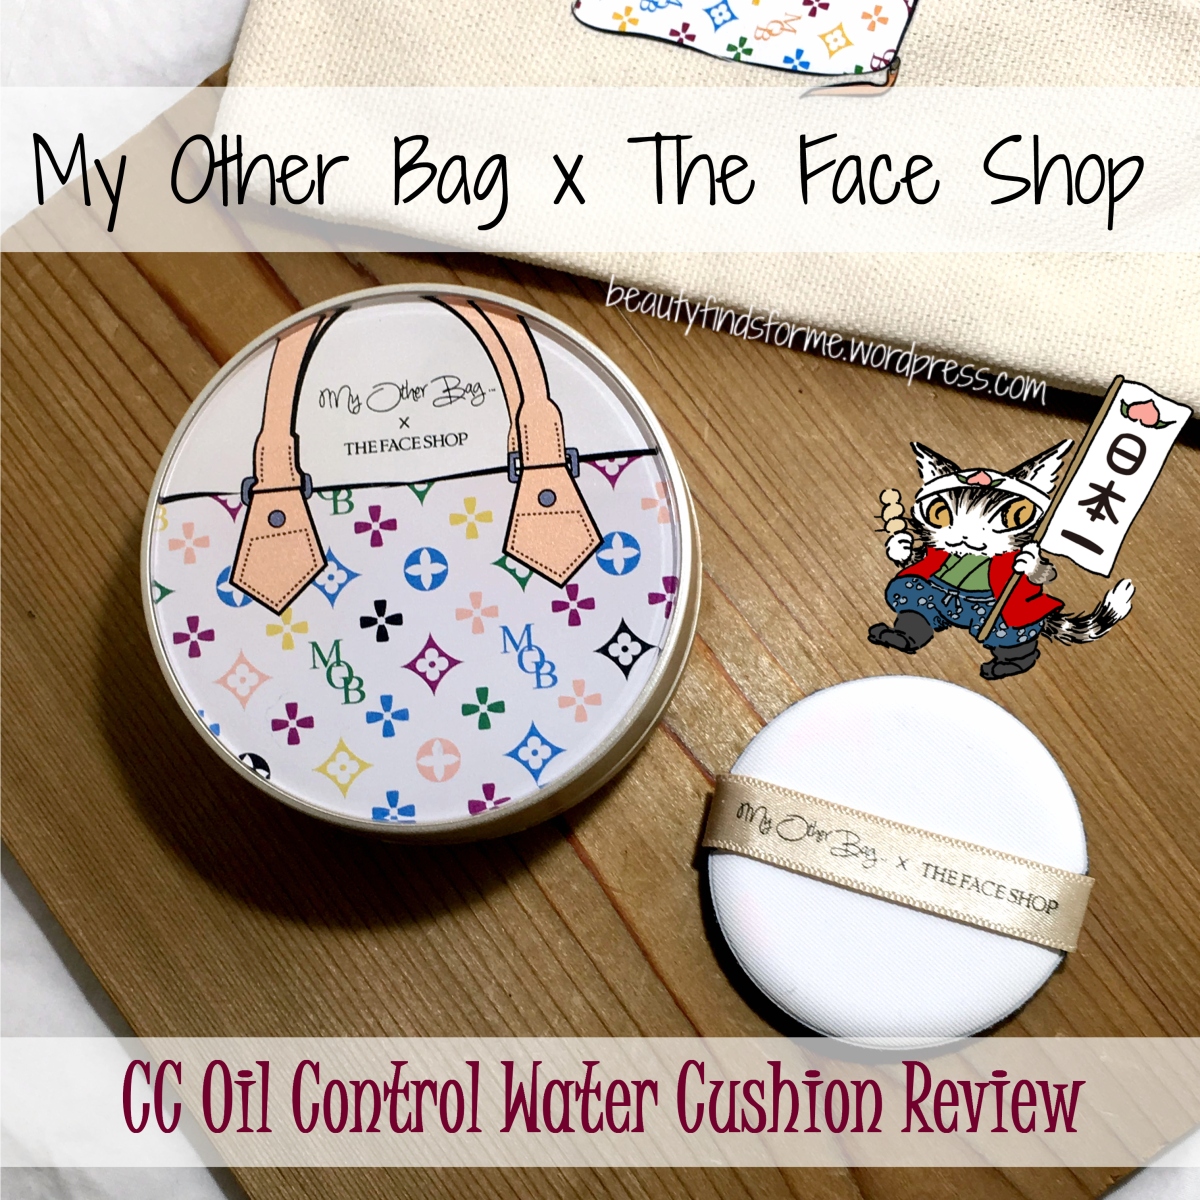 The Face Shop CC Oil Control Water Cushion My Other Bag Review +